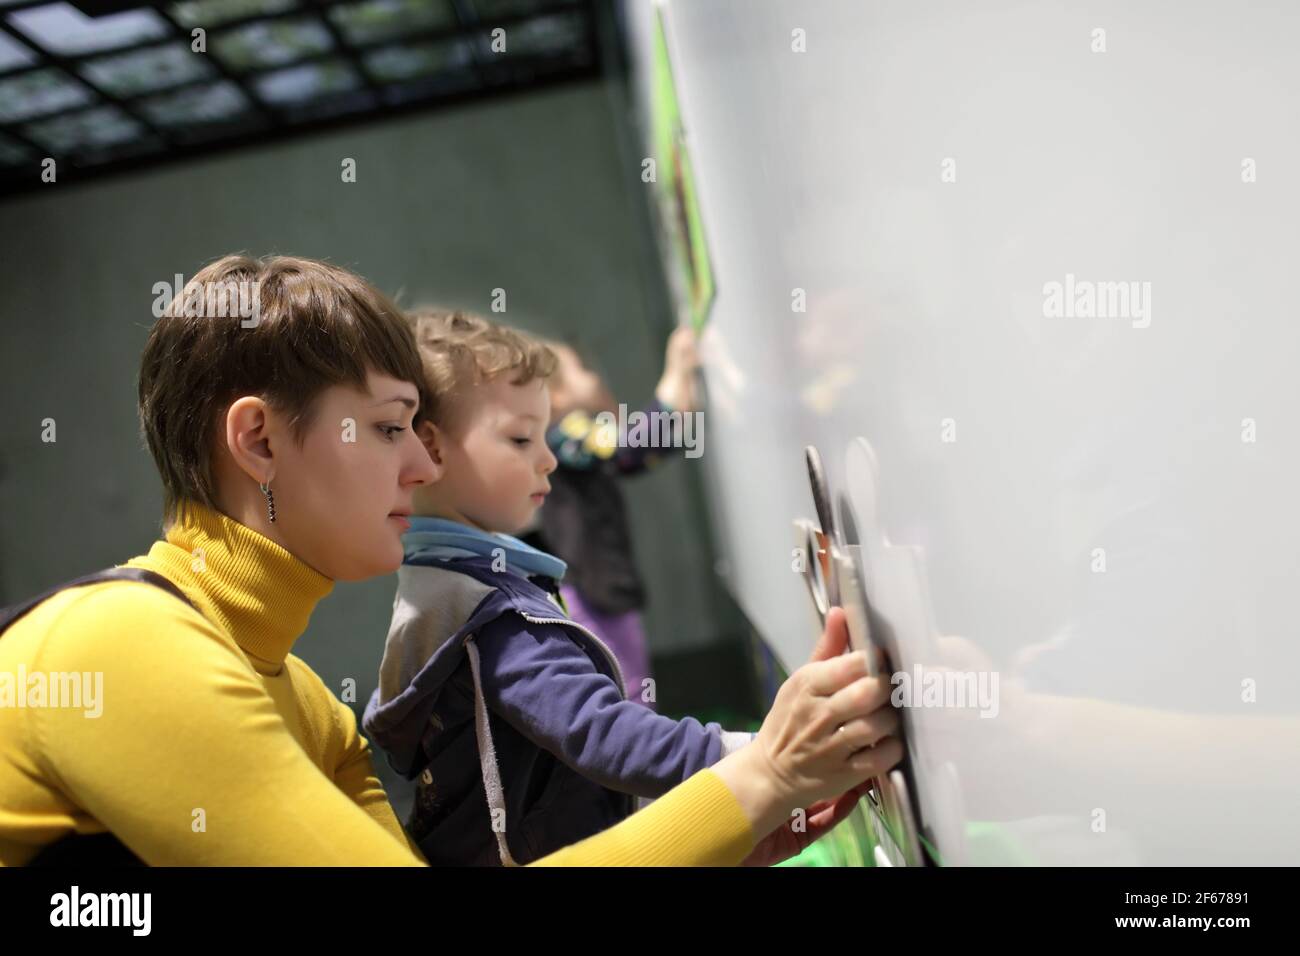 Mother and her son solving puzzles in a playroom Stock Photo